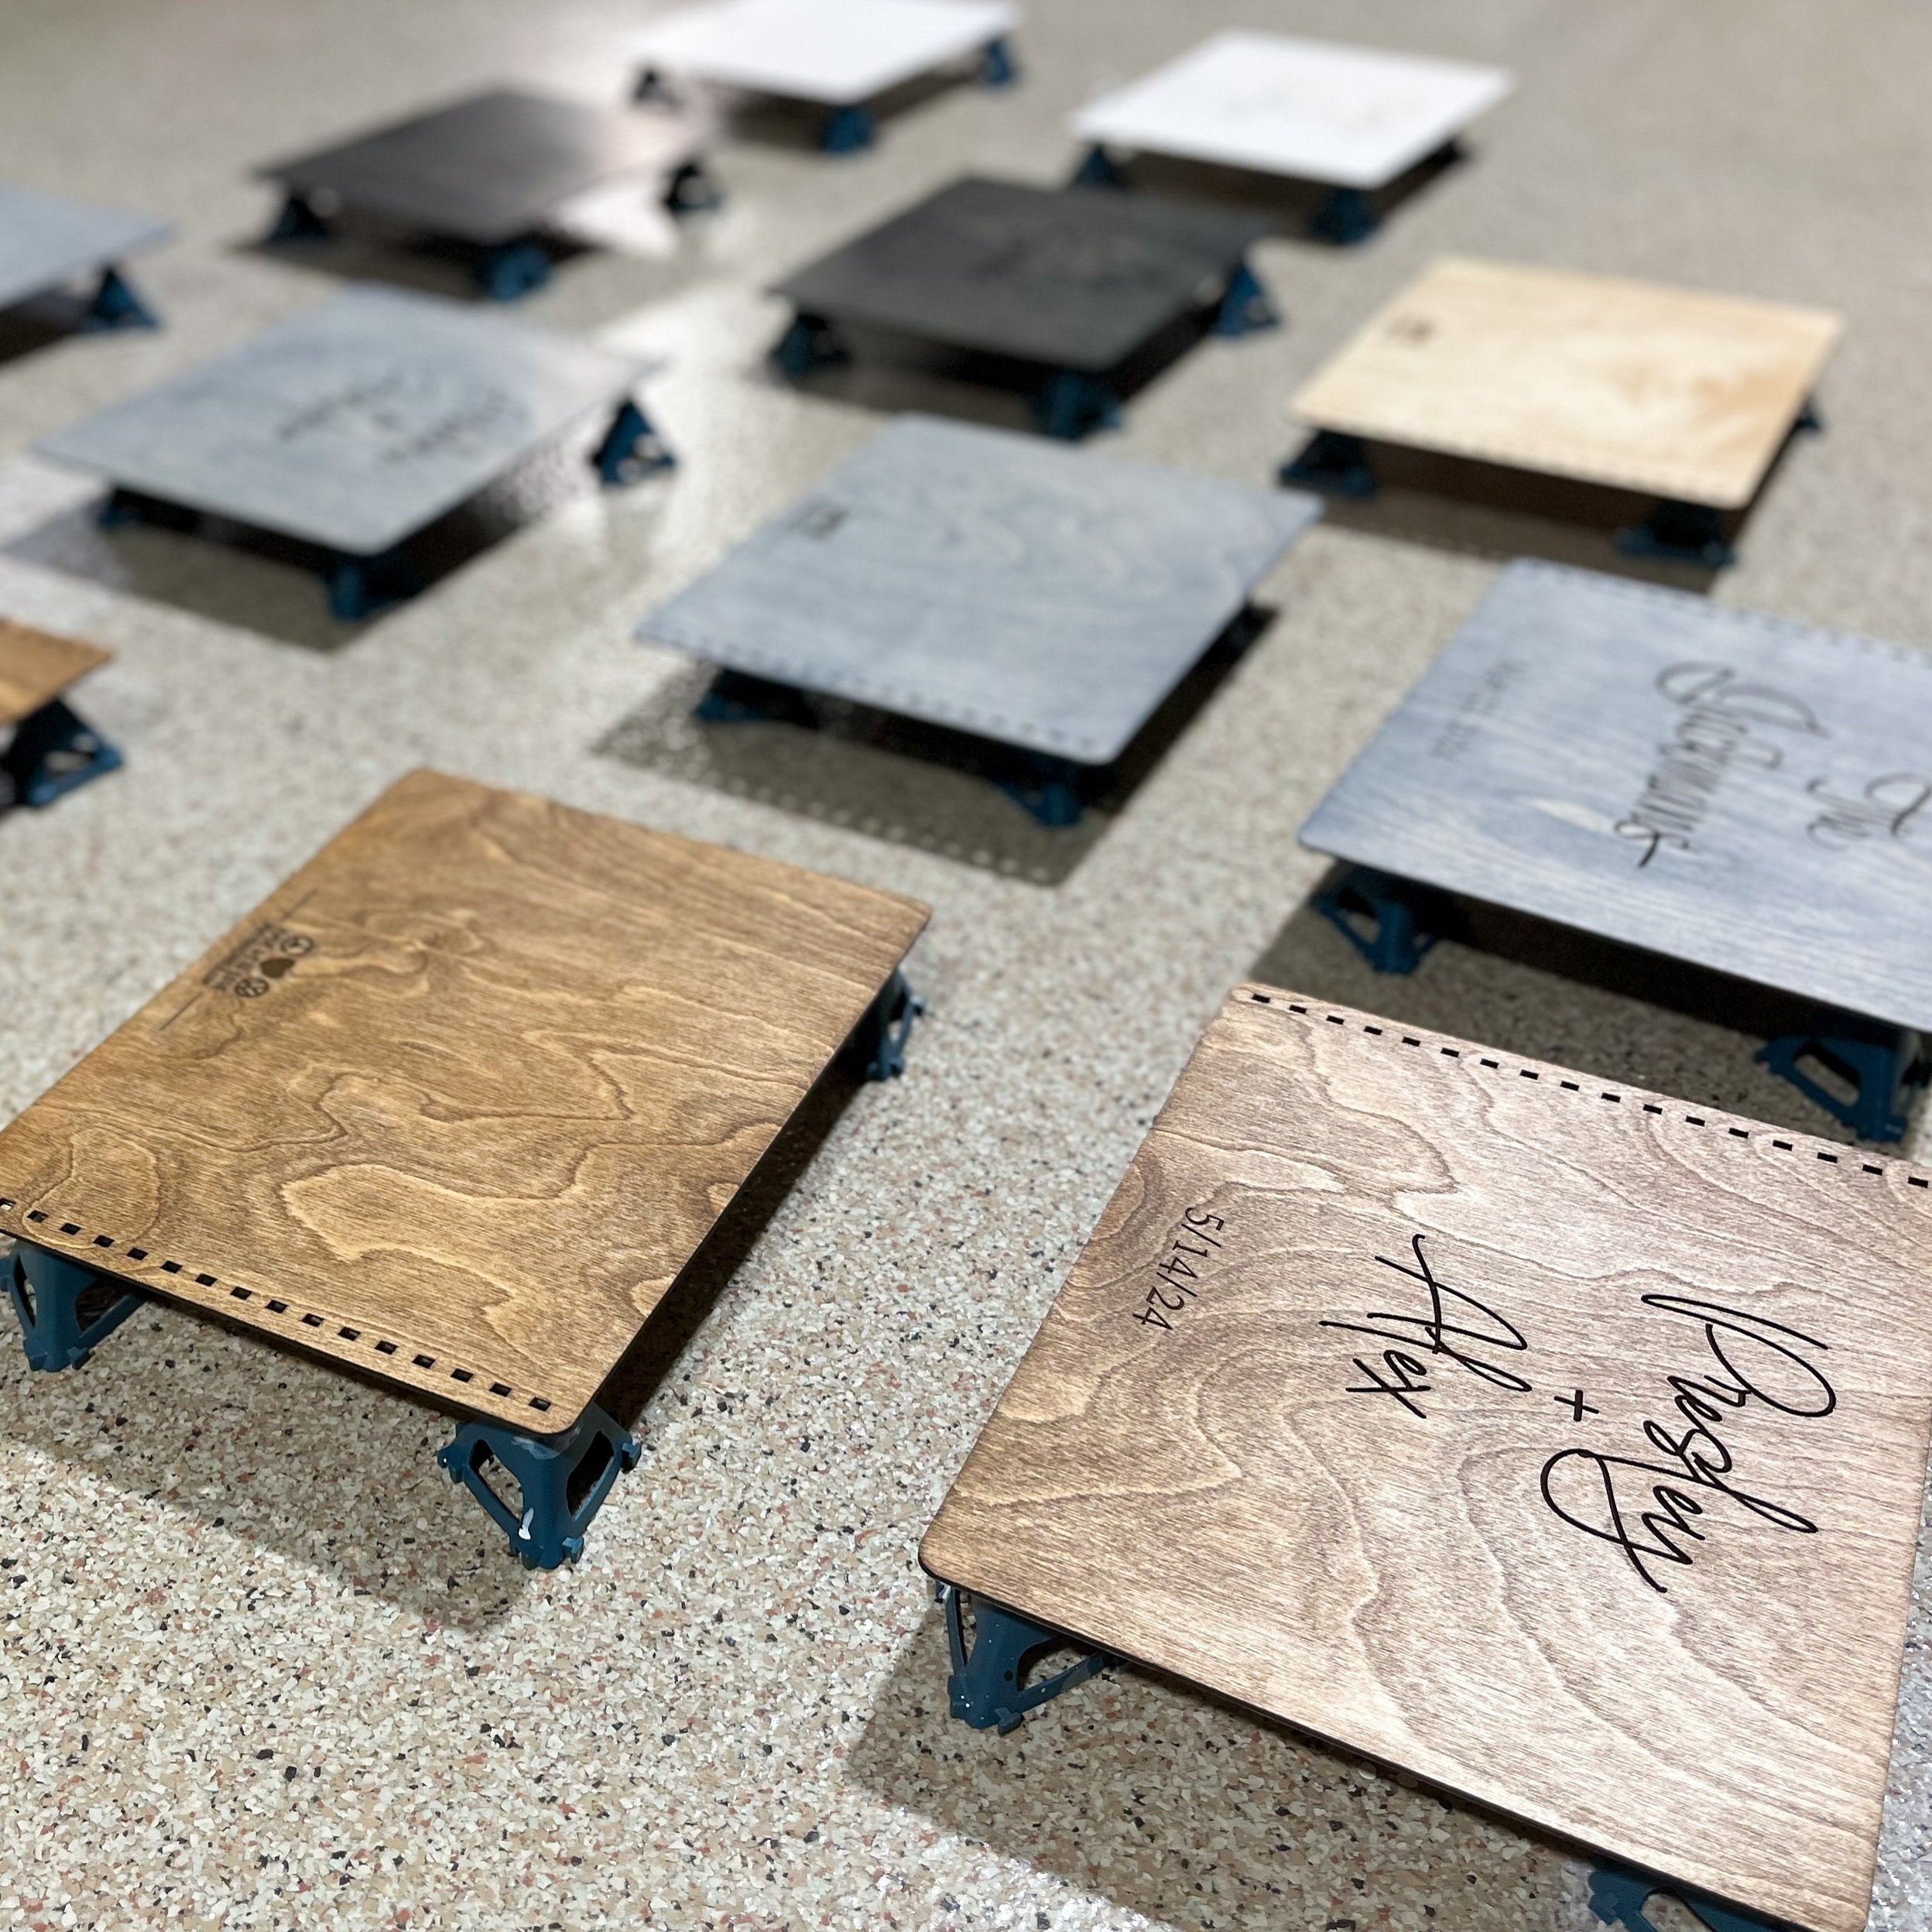 Everybody&rsquo;s ogling over the Met Gala outfits and I&rsquo;m over here grinning like an idiot literally watching sealer dry. Cory knocks it out of the park every time with our custom guestbooks. He&rsquo;s been cutting and staining and sanding li